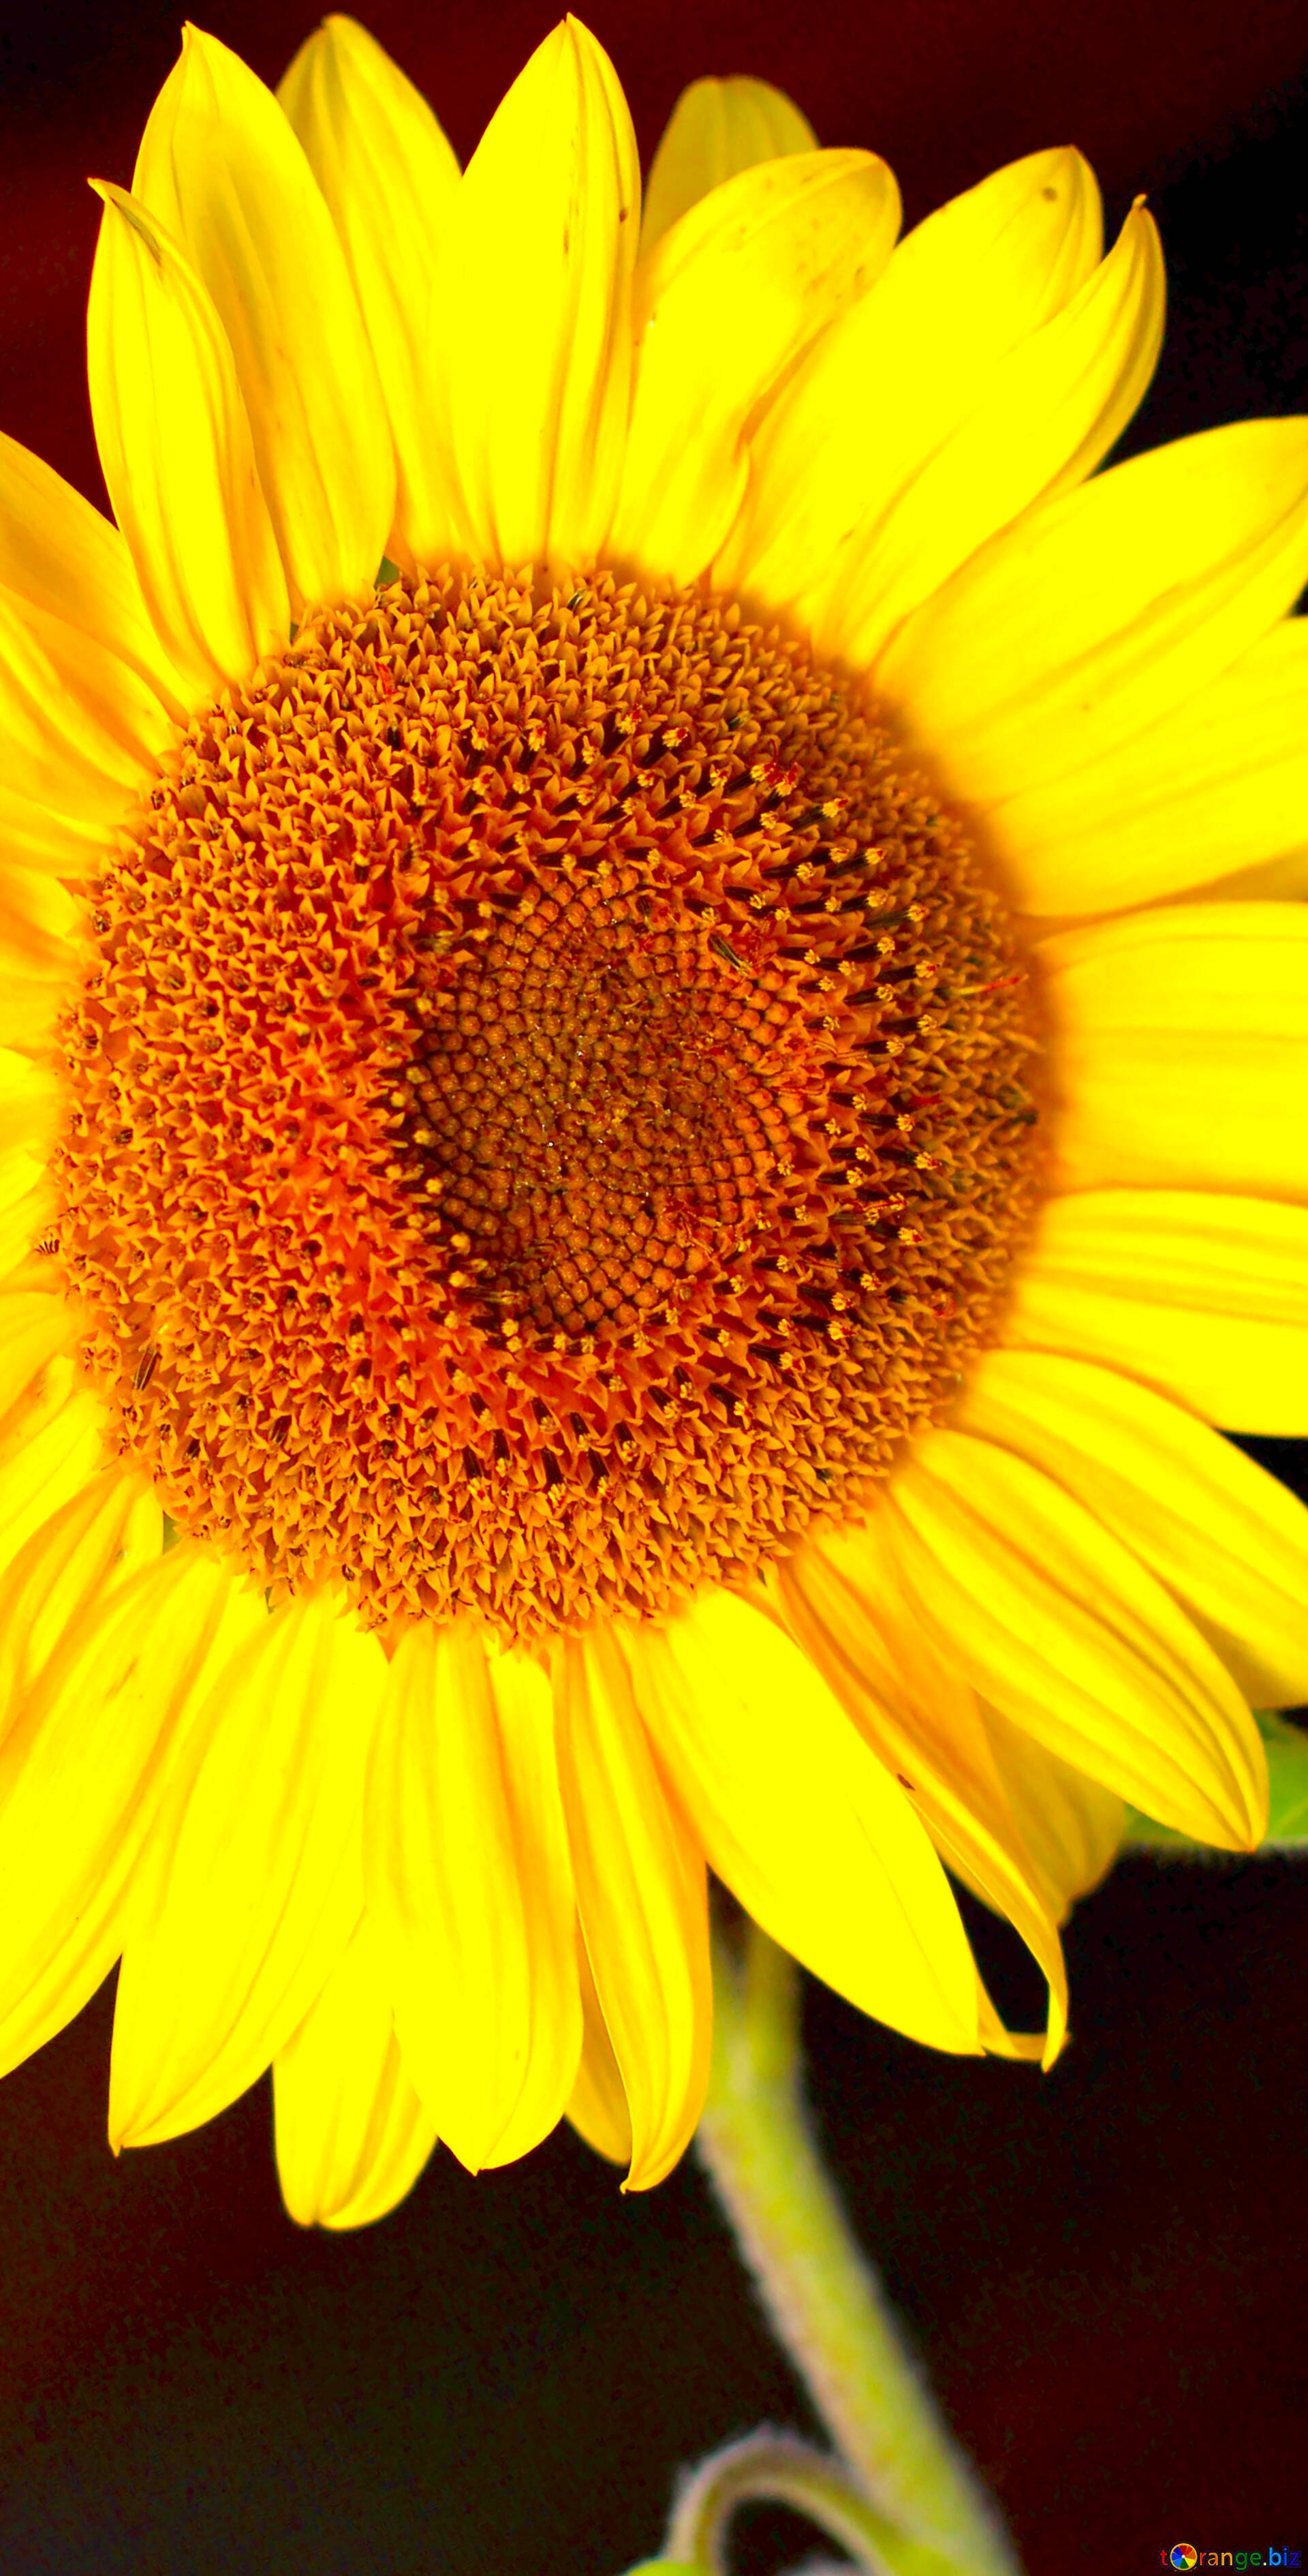 Download Free Picture Image For Profile Picture Sunflower Flower